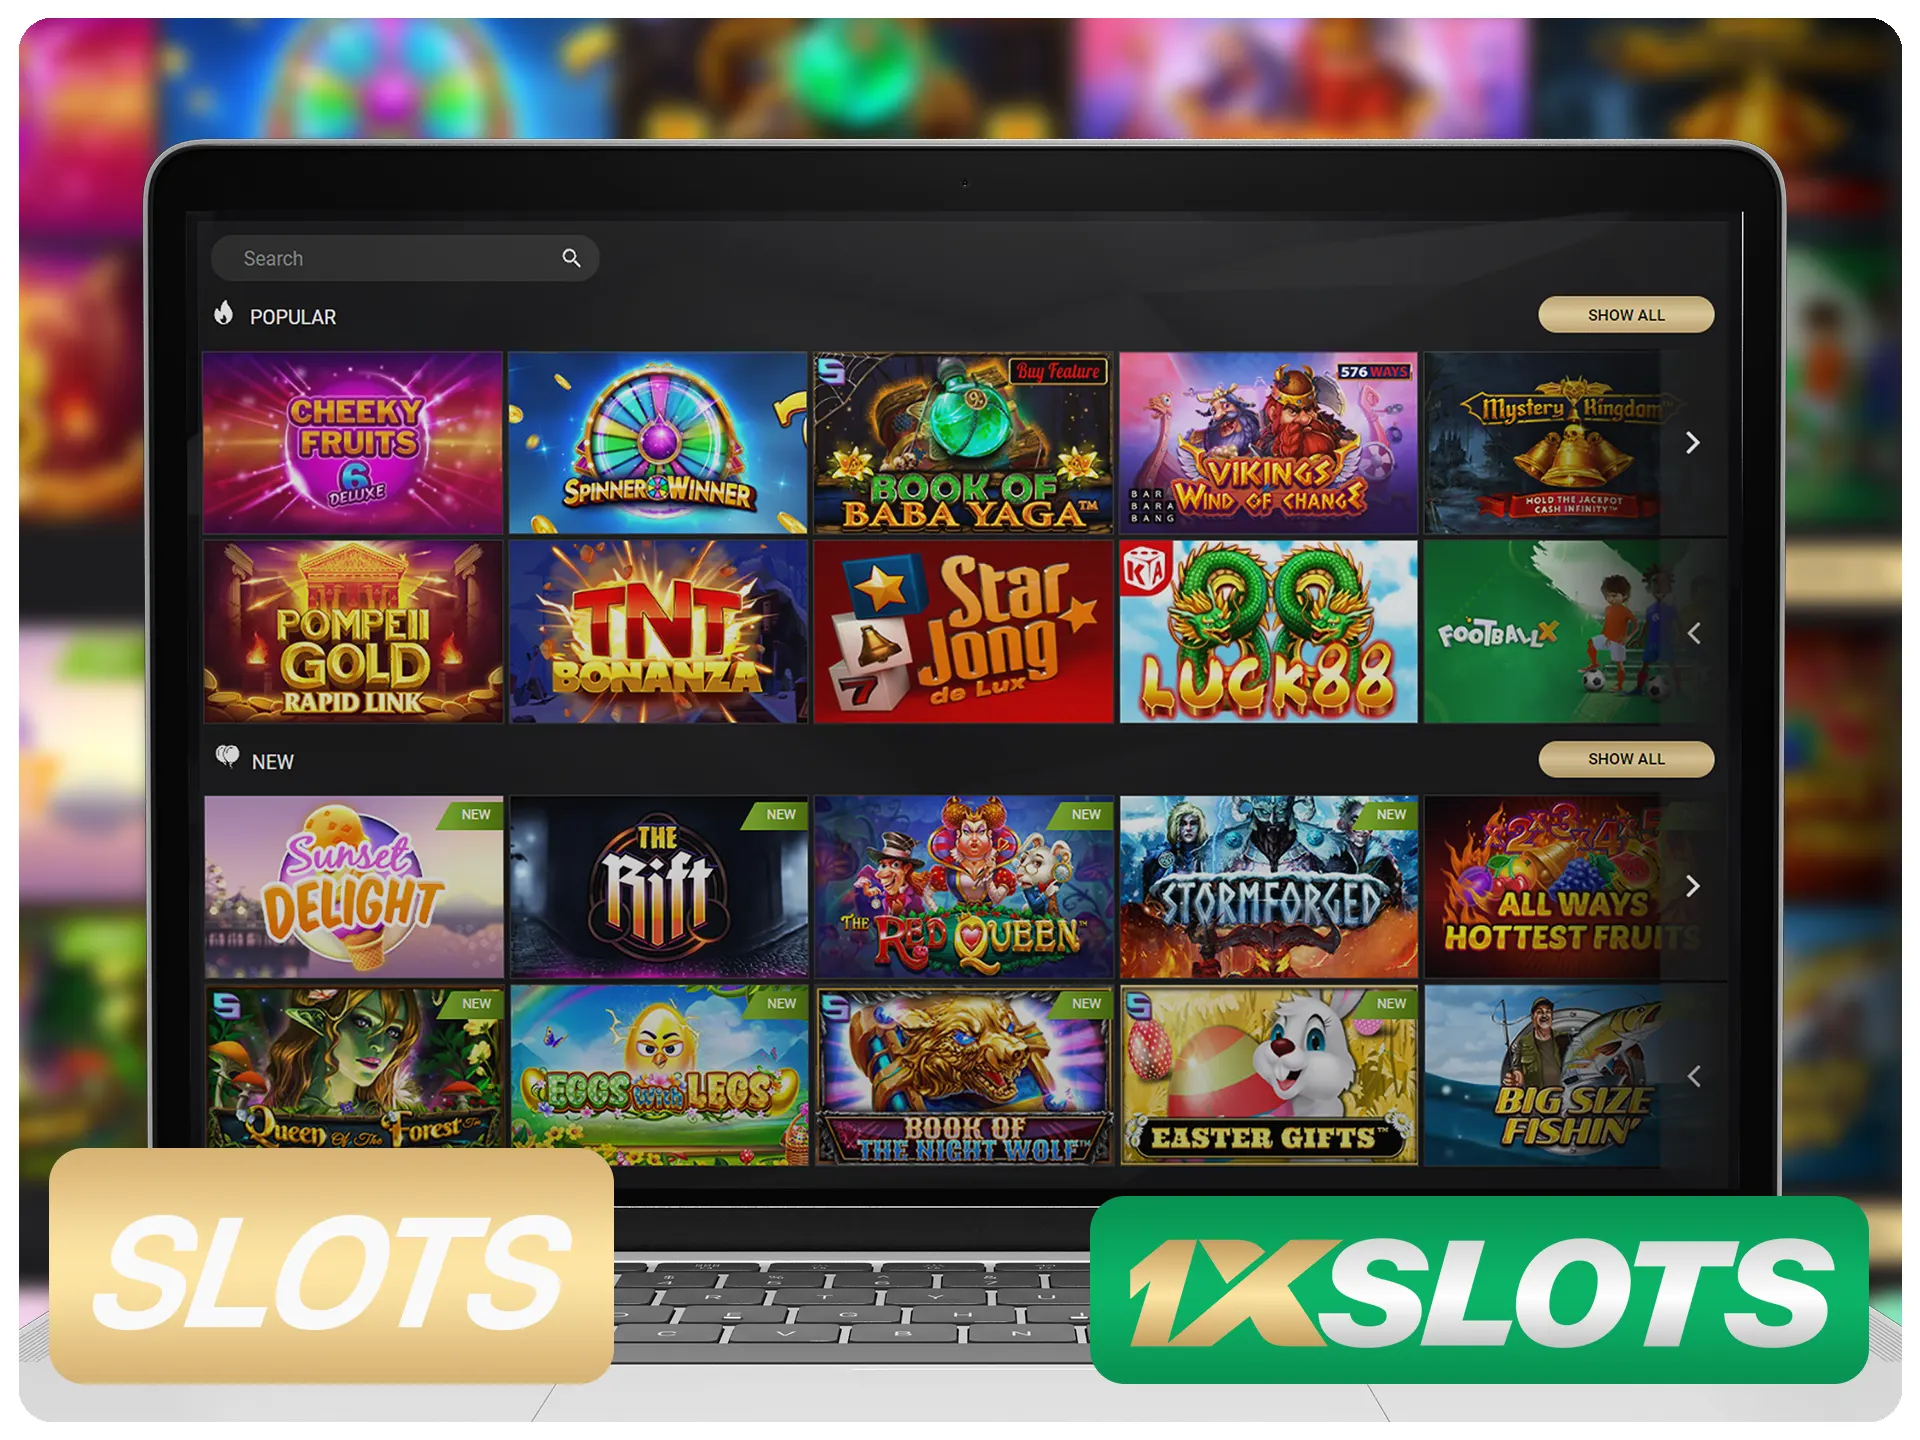 Search for your favourite slots to play at 1xSlots.